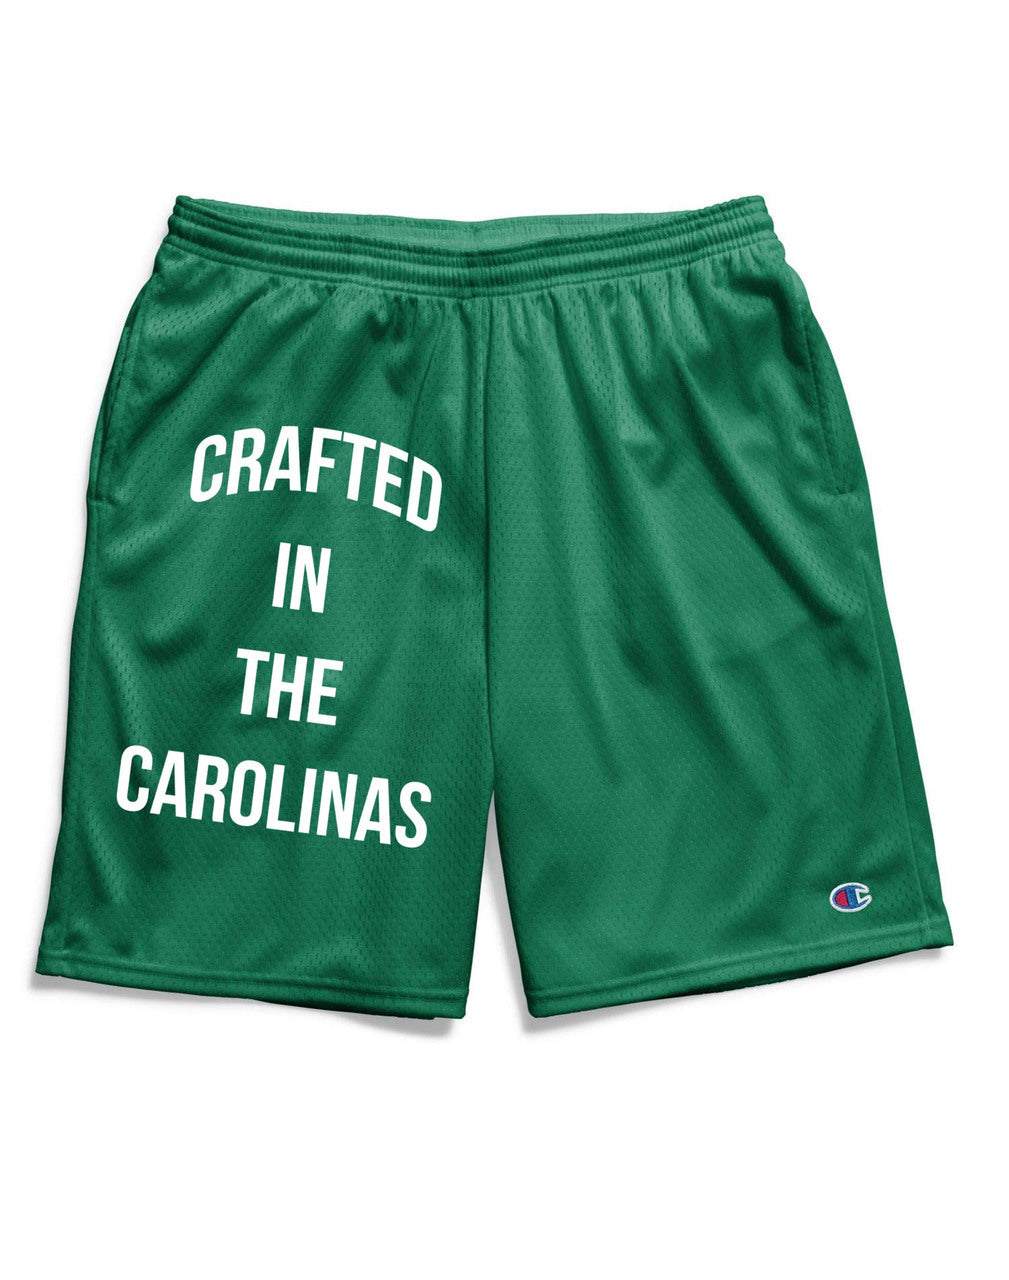 Crafted in the Carolinas Champion Gym Shorts With Pockets- Green